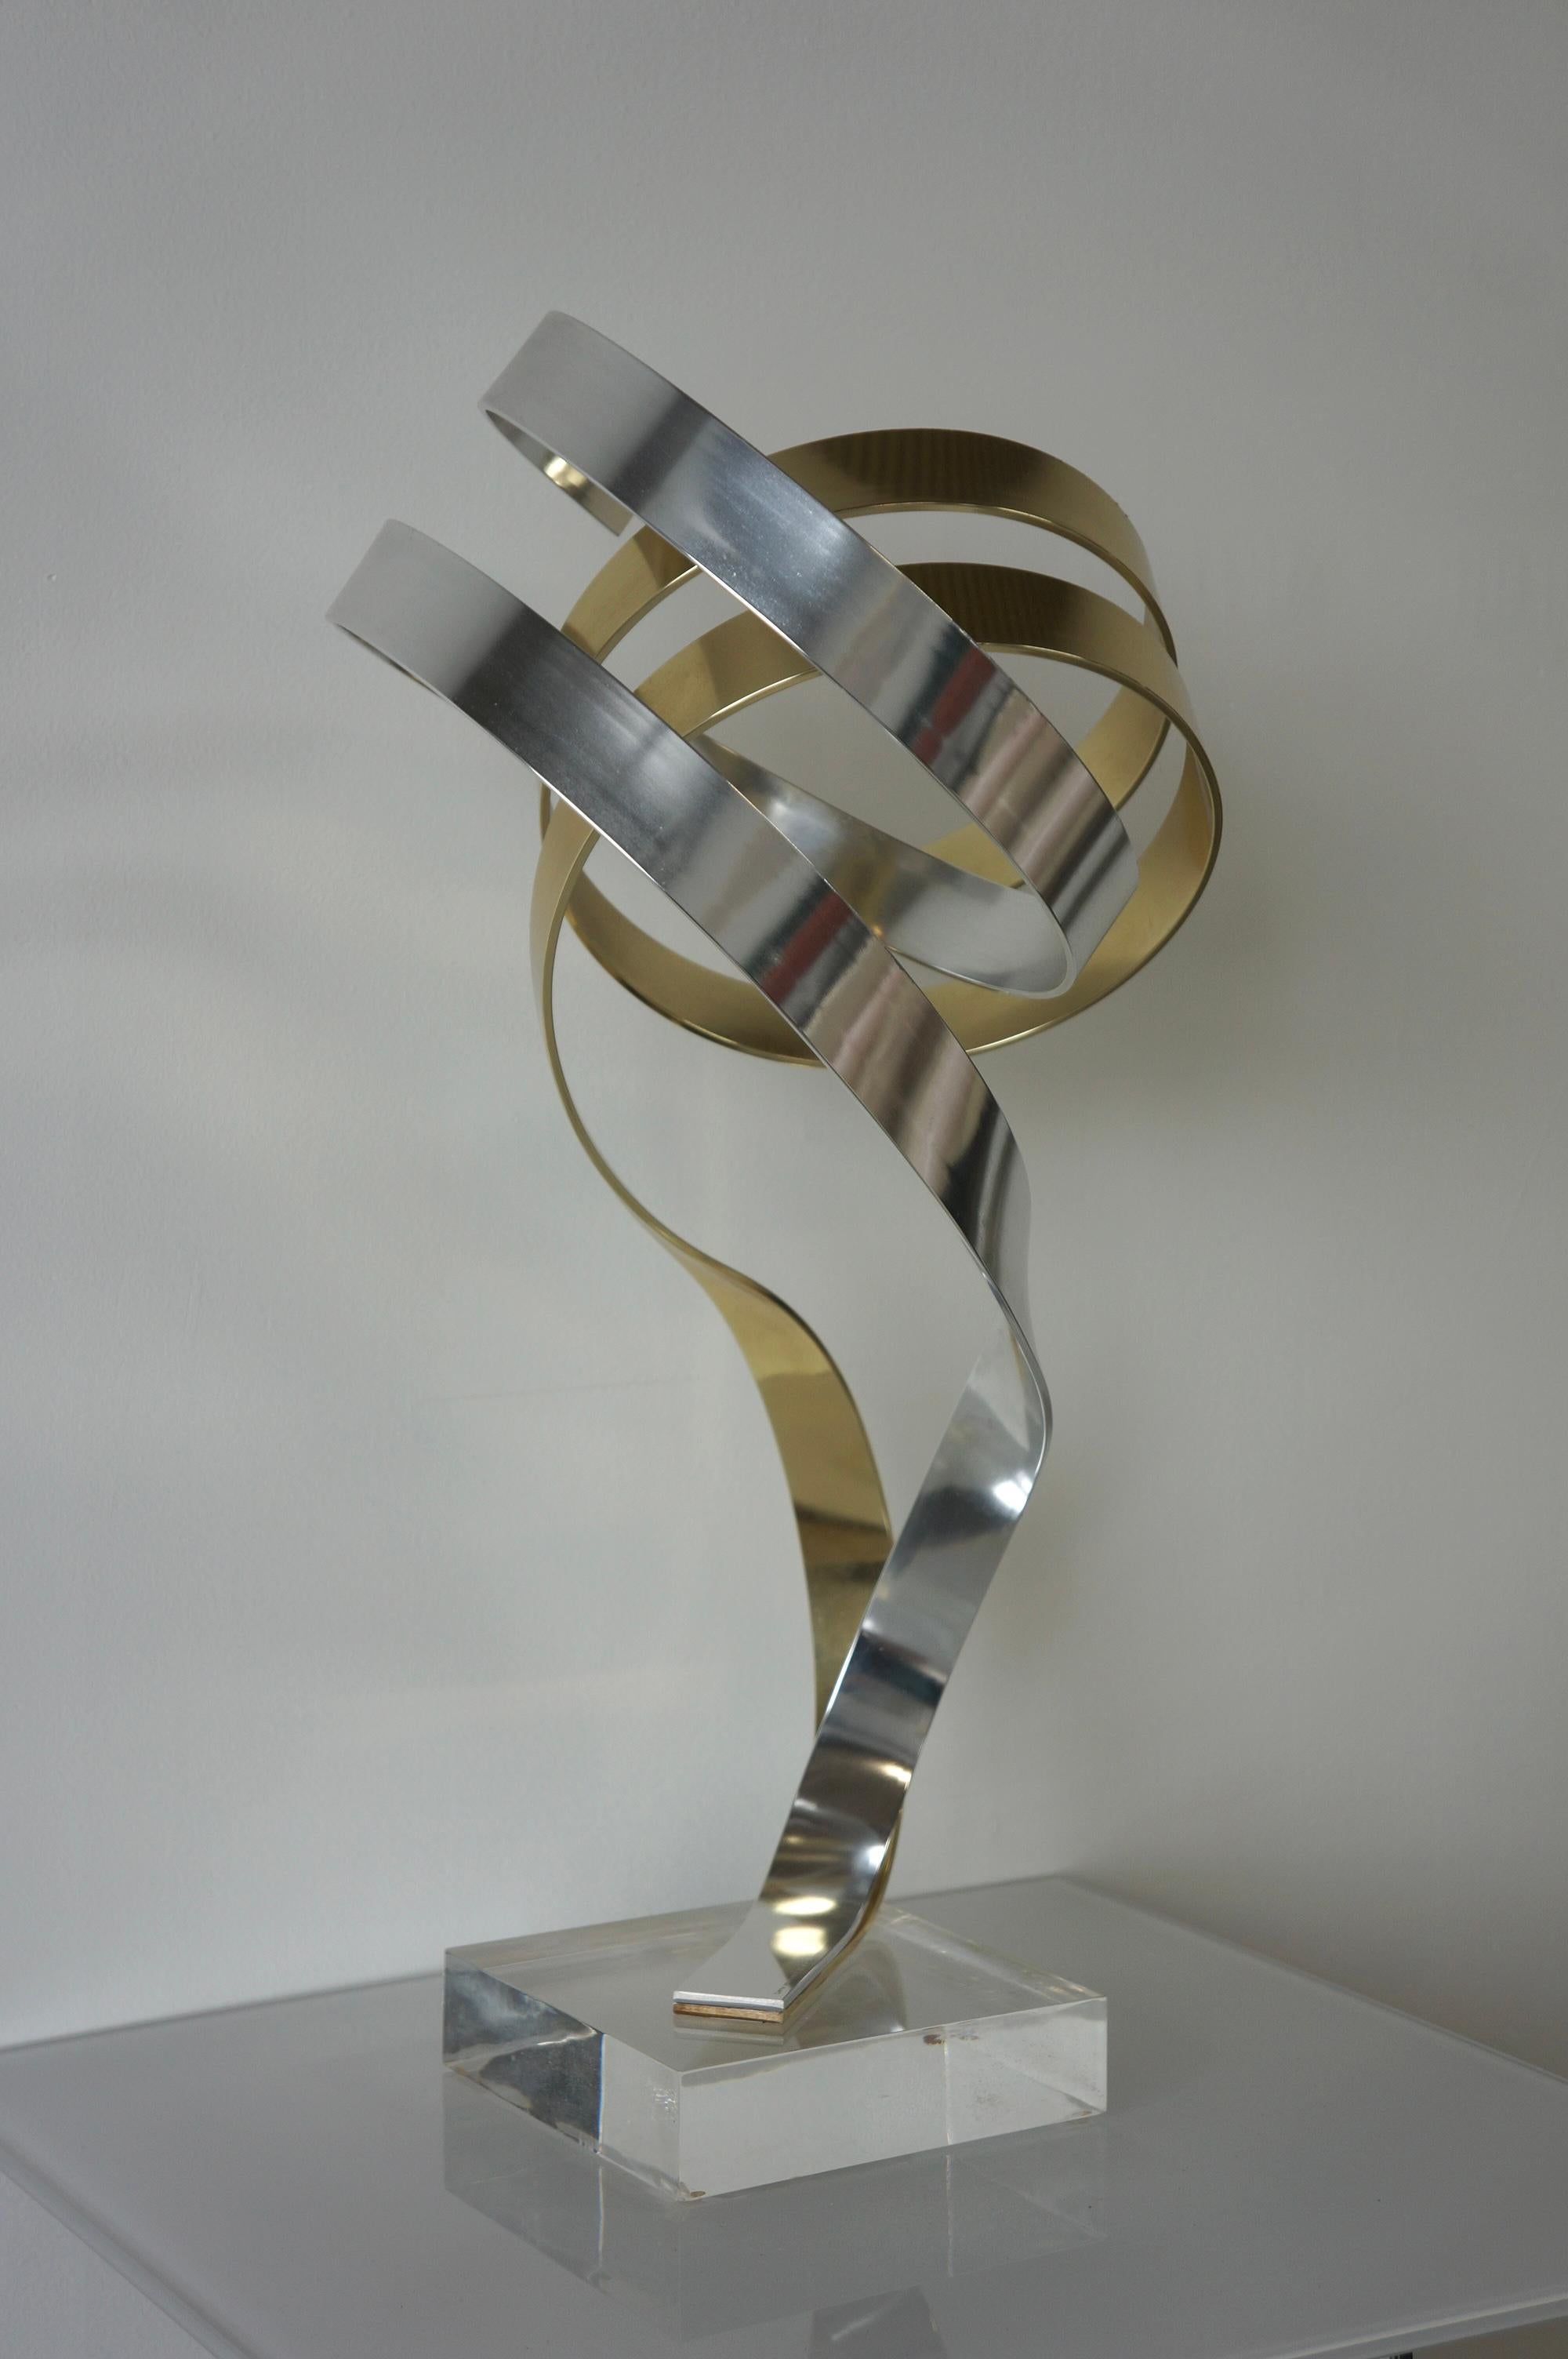 Abstract ‘Ribbon’ sculpture made with anodized aluminum with gold tone by Dan Murphy. This kinetic sculpture is reminiscent of a ribbon shape in which the aluminum sculpted pieces are intertwined supported by a lucite base. It’s dated and signed Dan